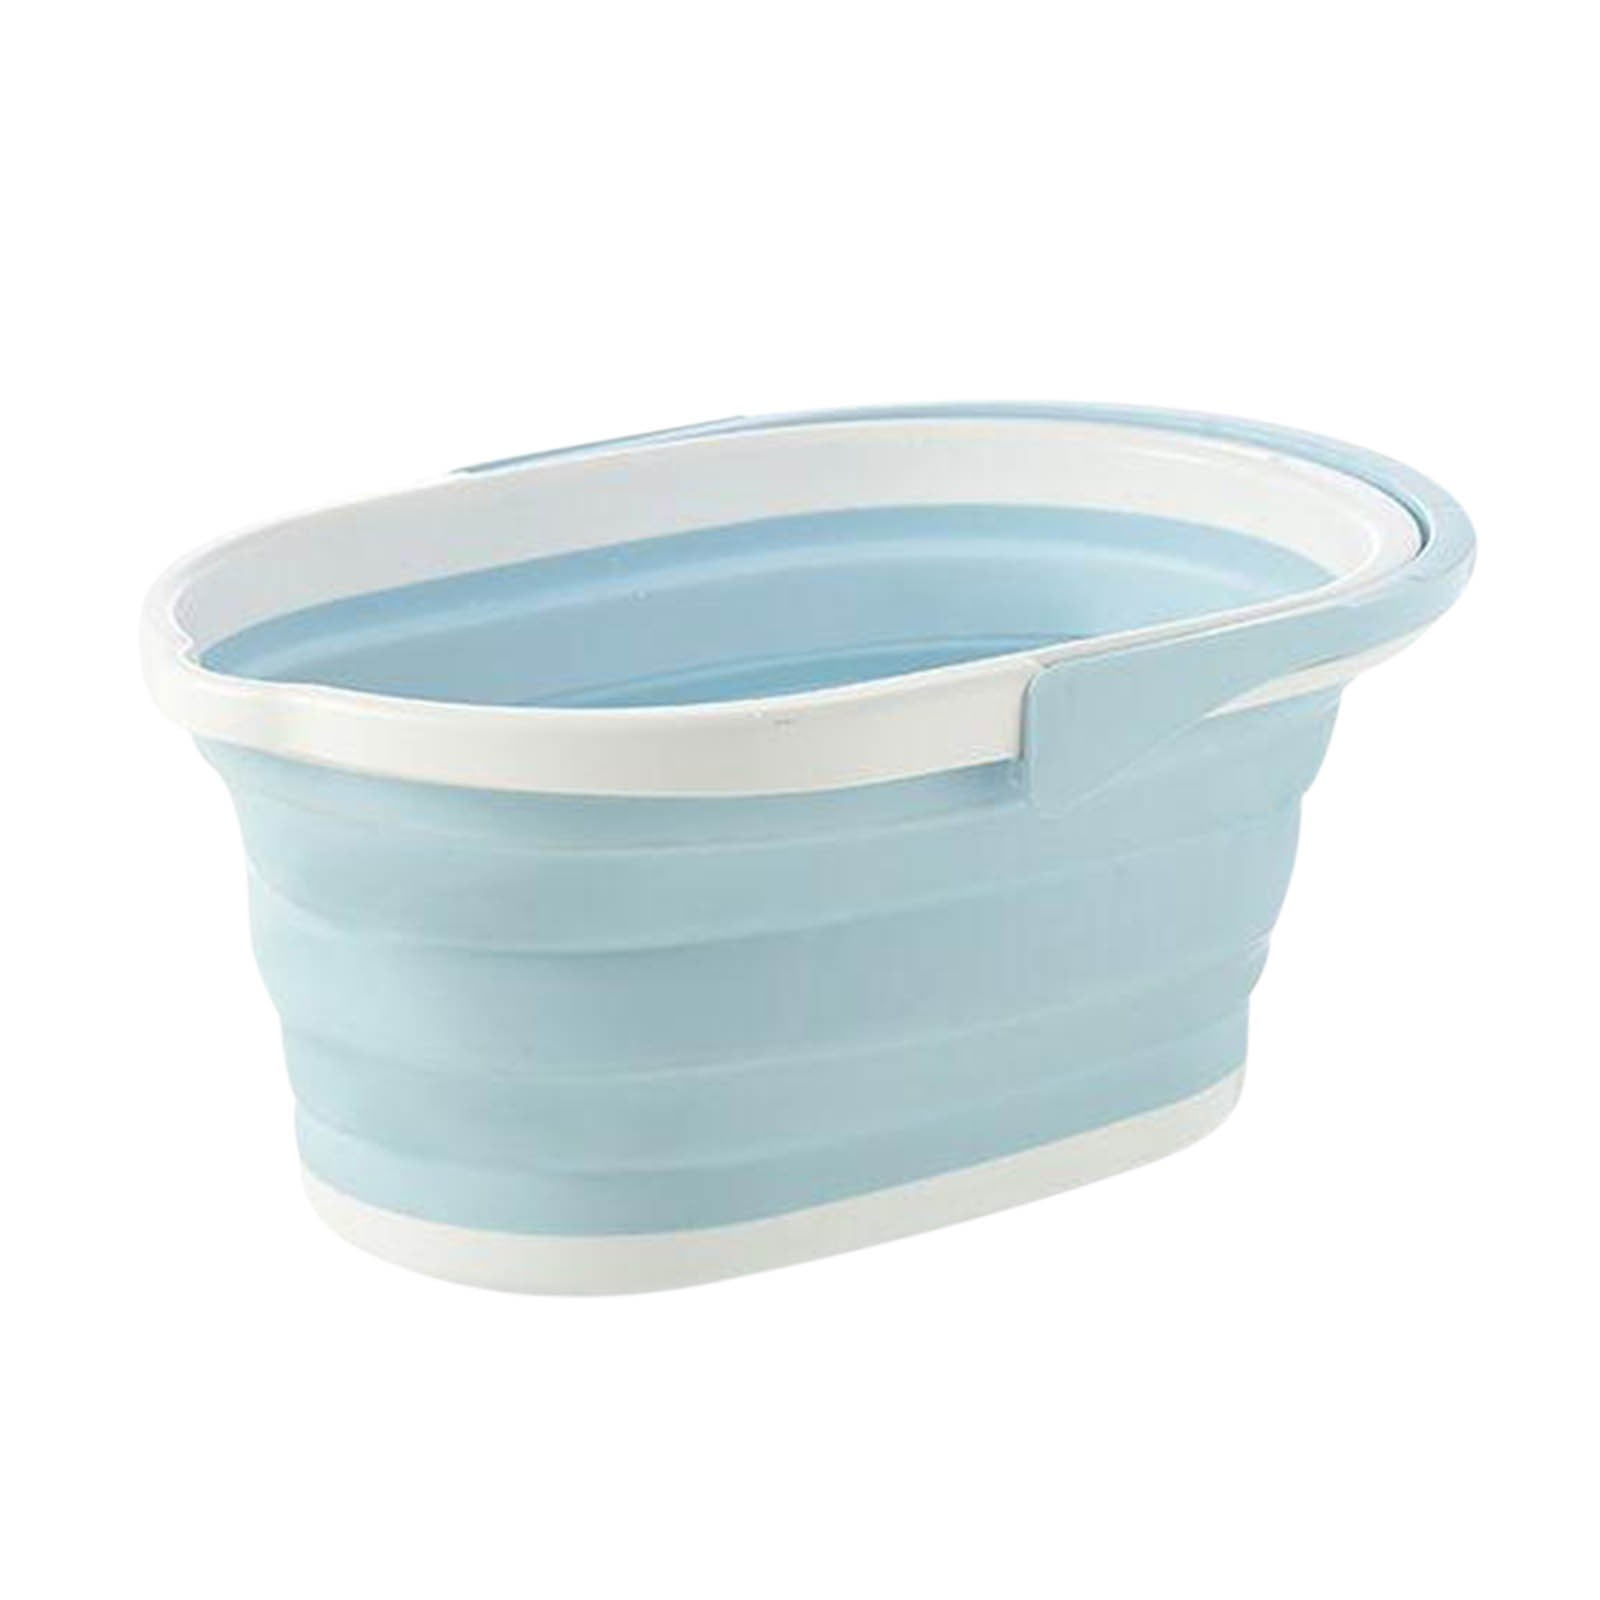 Pompotops Collapsible Bucket, Portable Sink, Multifunctional